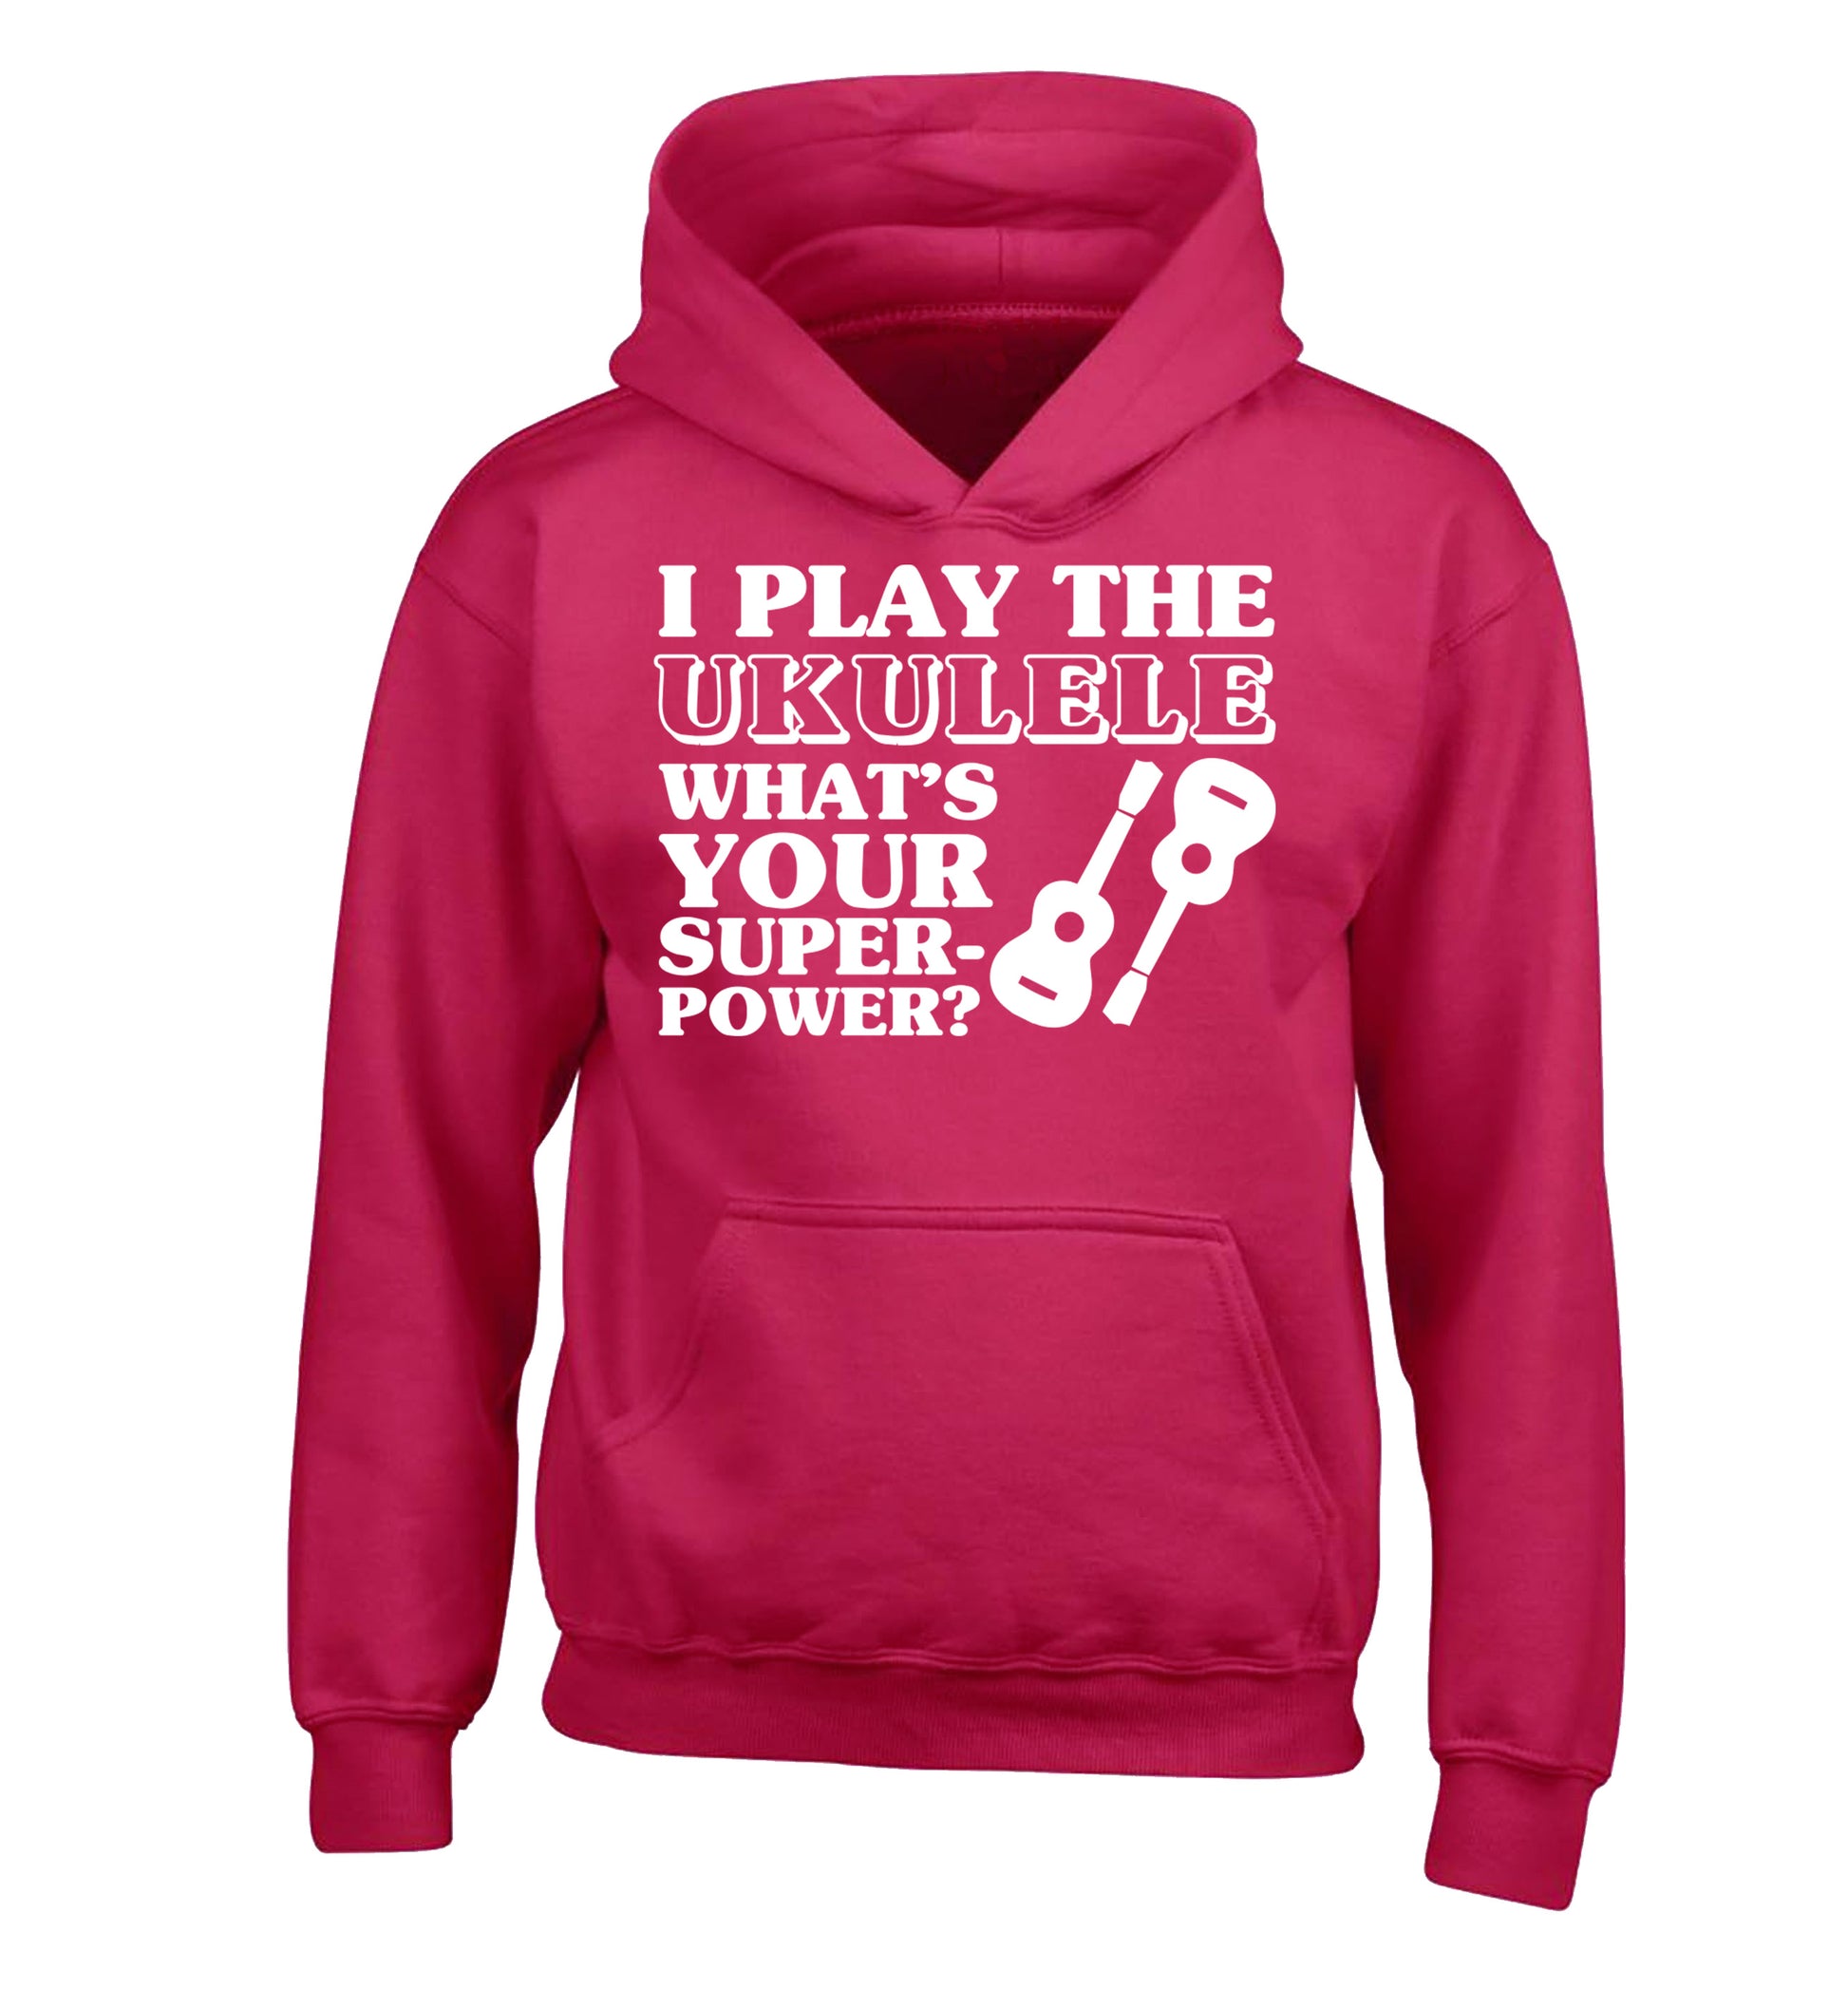 I play the ukulele what's your superpower? children's pink hoodie 12-14 Years